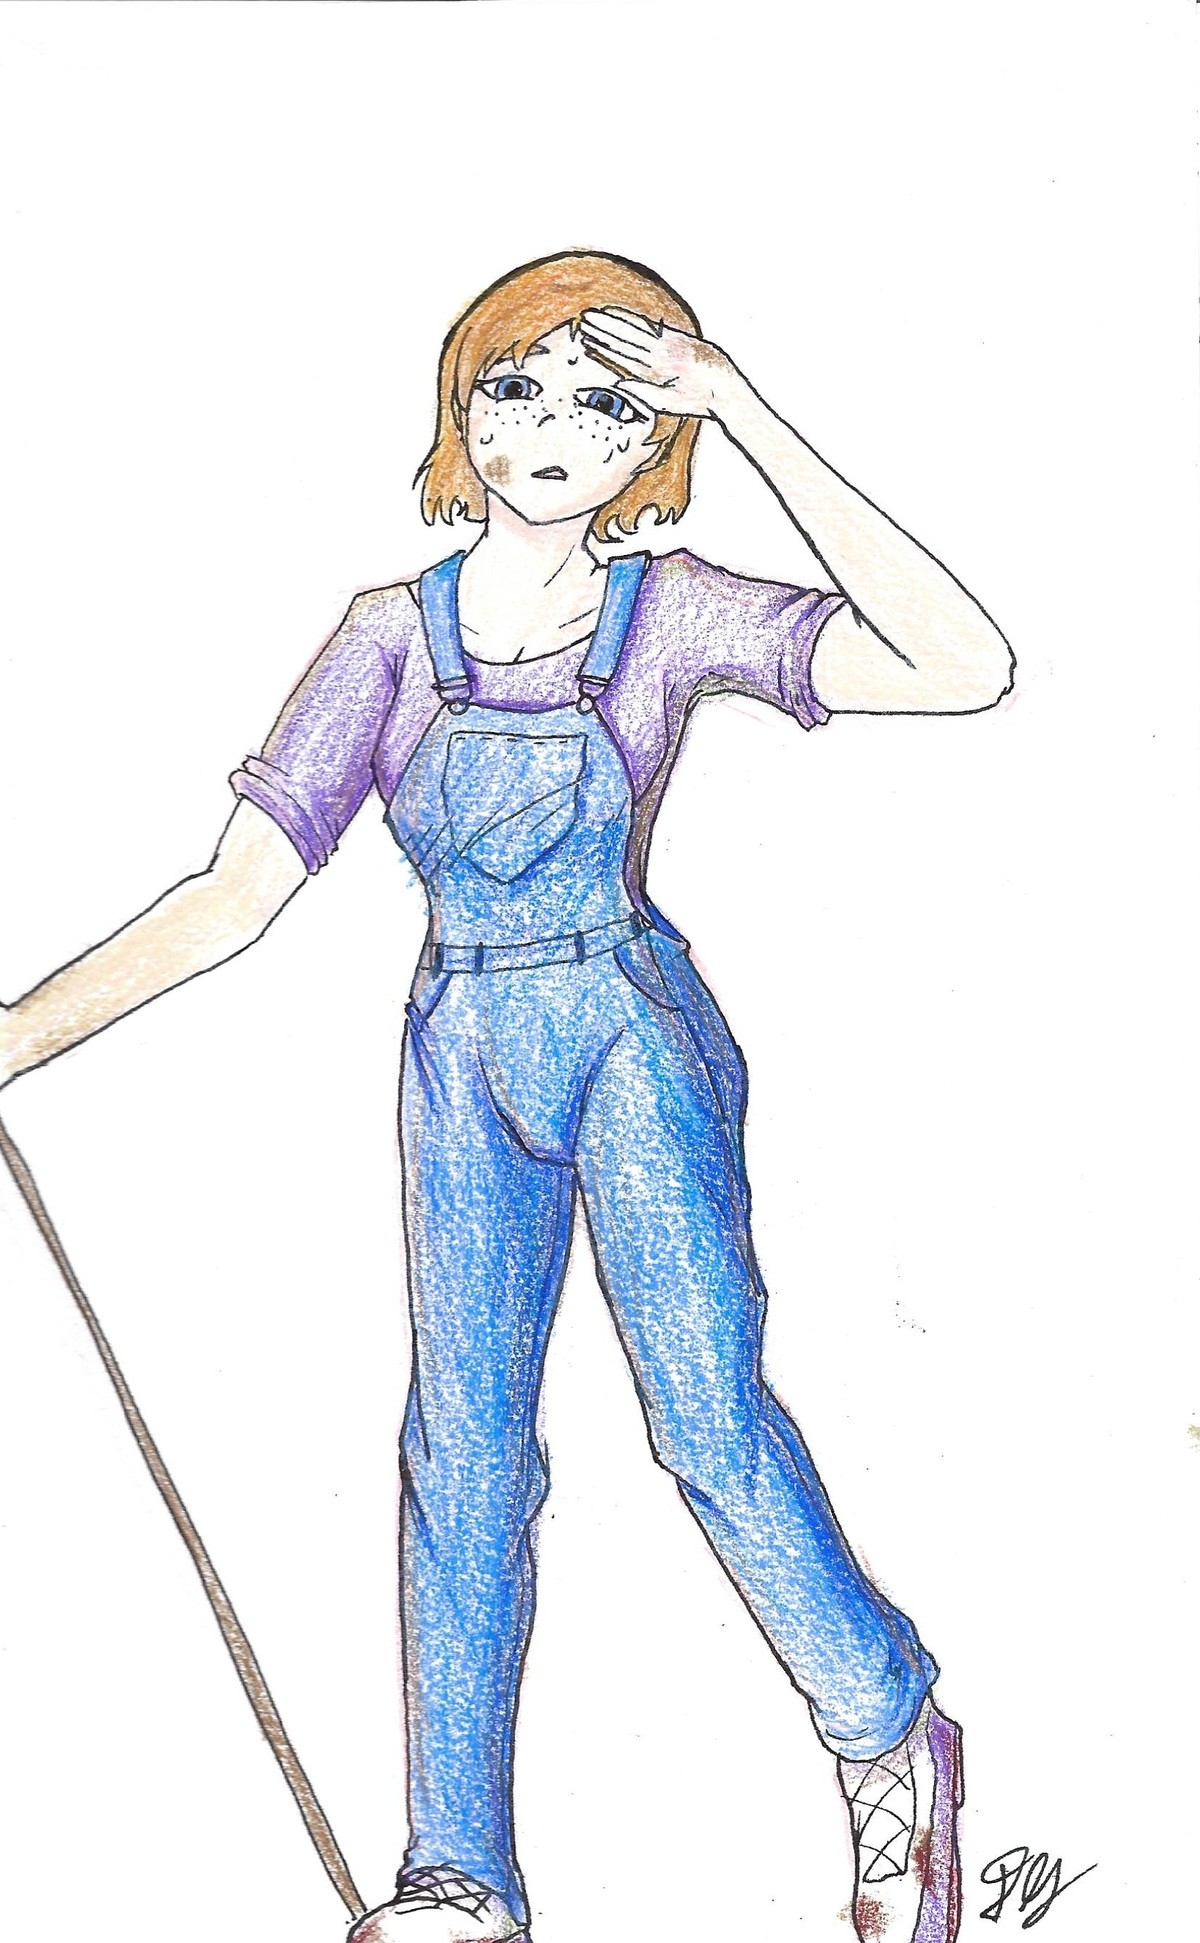 Jade in farmers clothes-colored. Decide to go ahead and around with colored pencils since its been a minute. join list: DaringDoodles (51 subs)Mention Clicks: 4